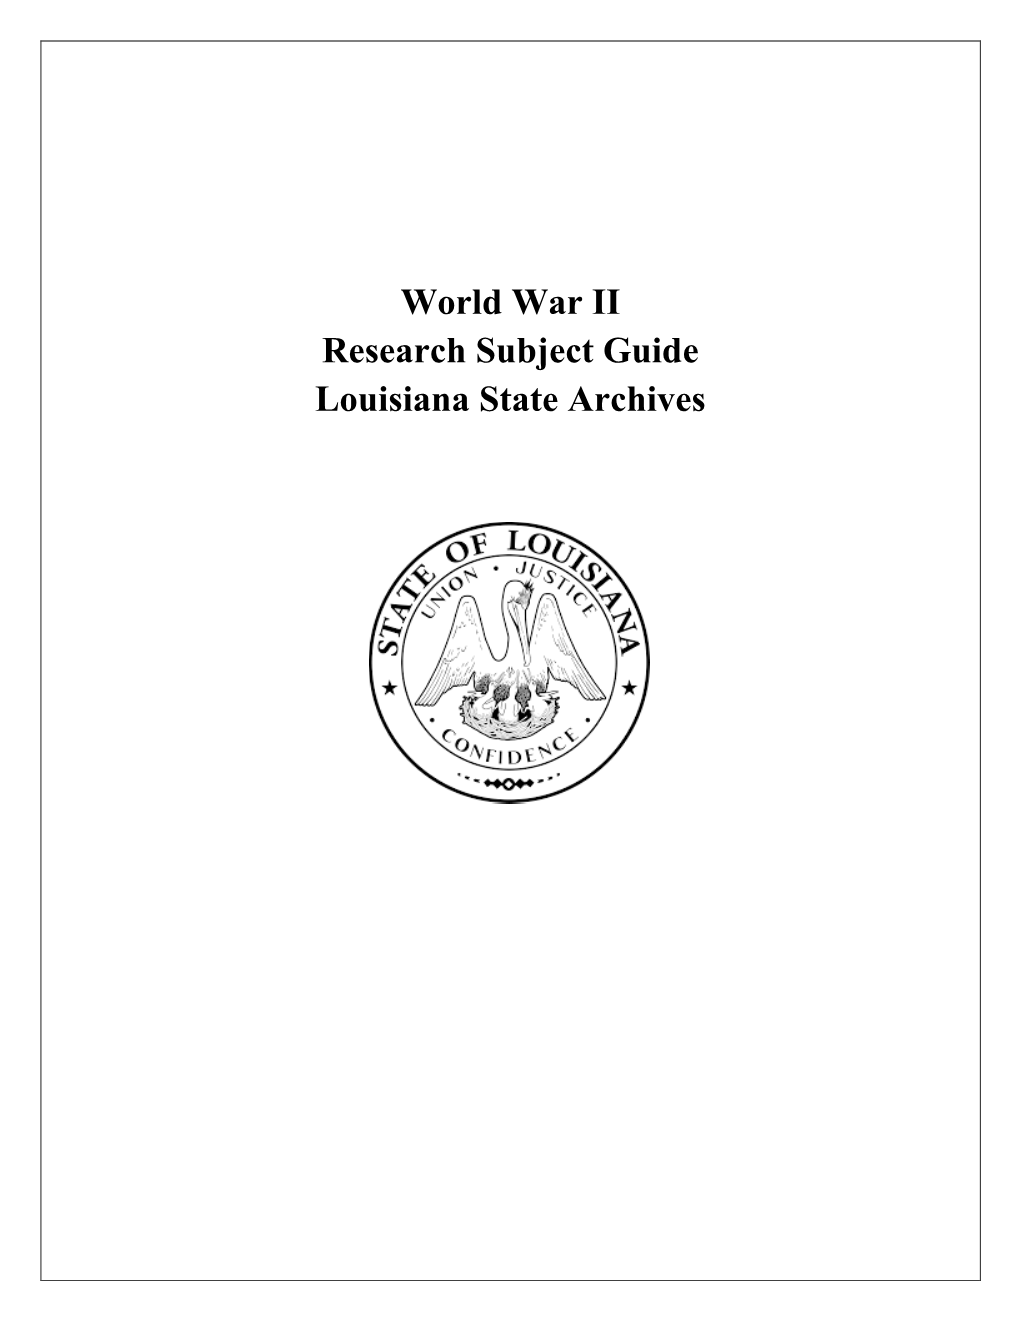 World War II Research Subject Guide Louisiana State Archives